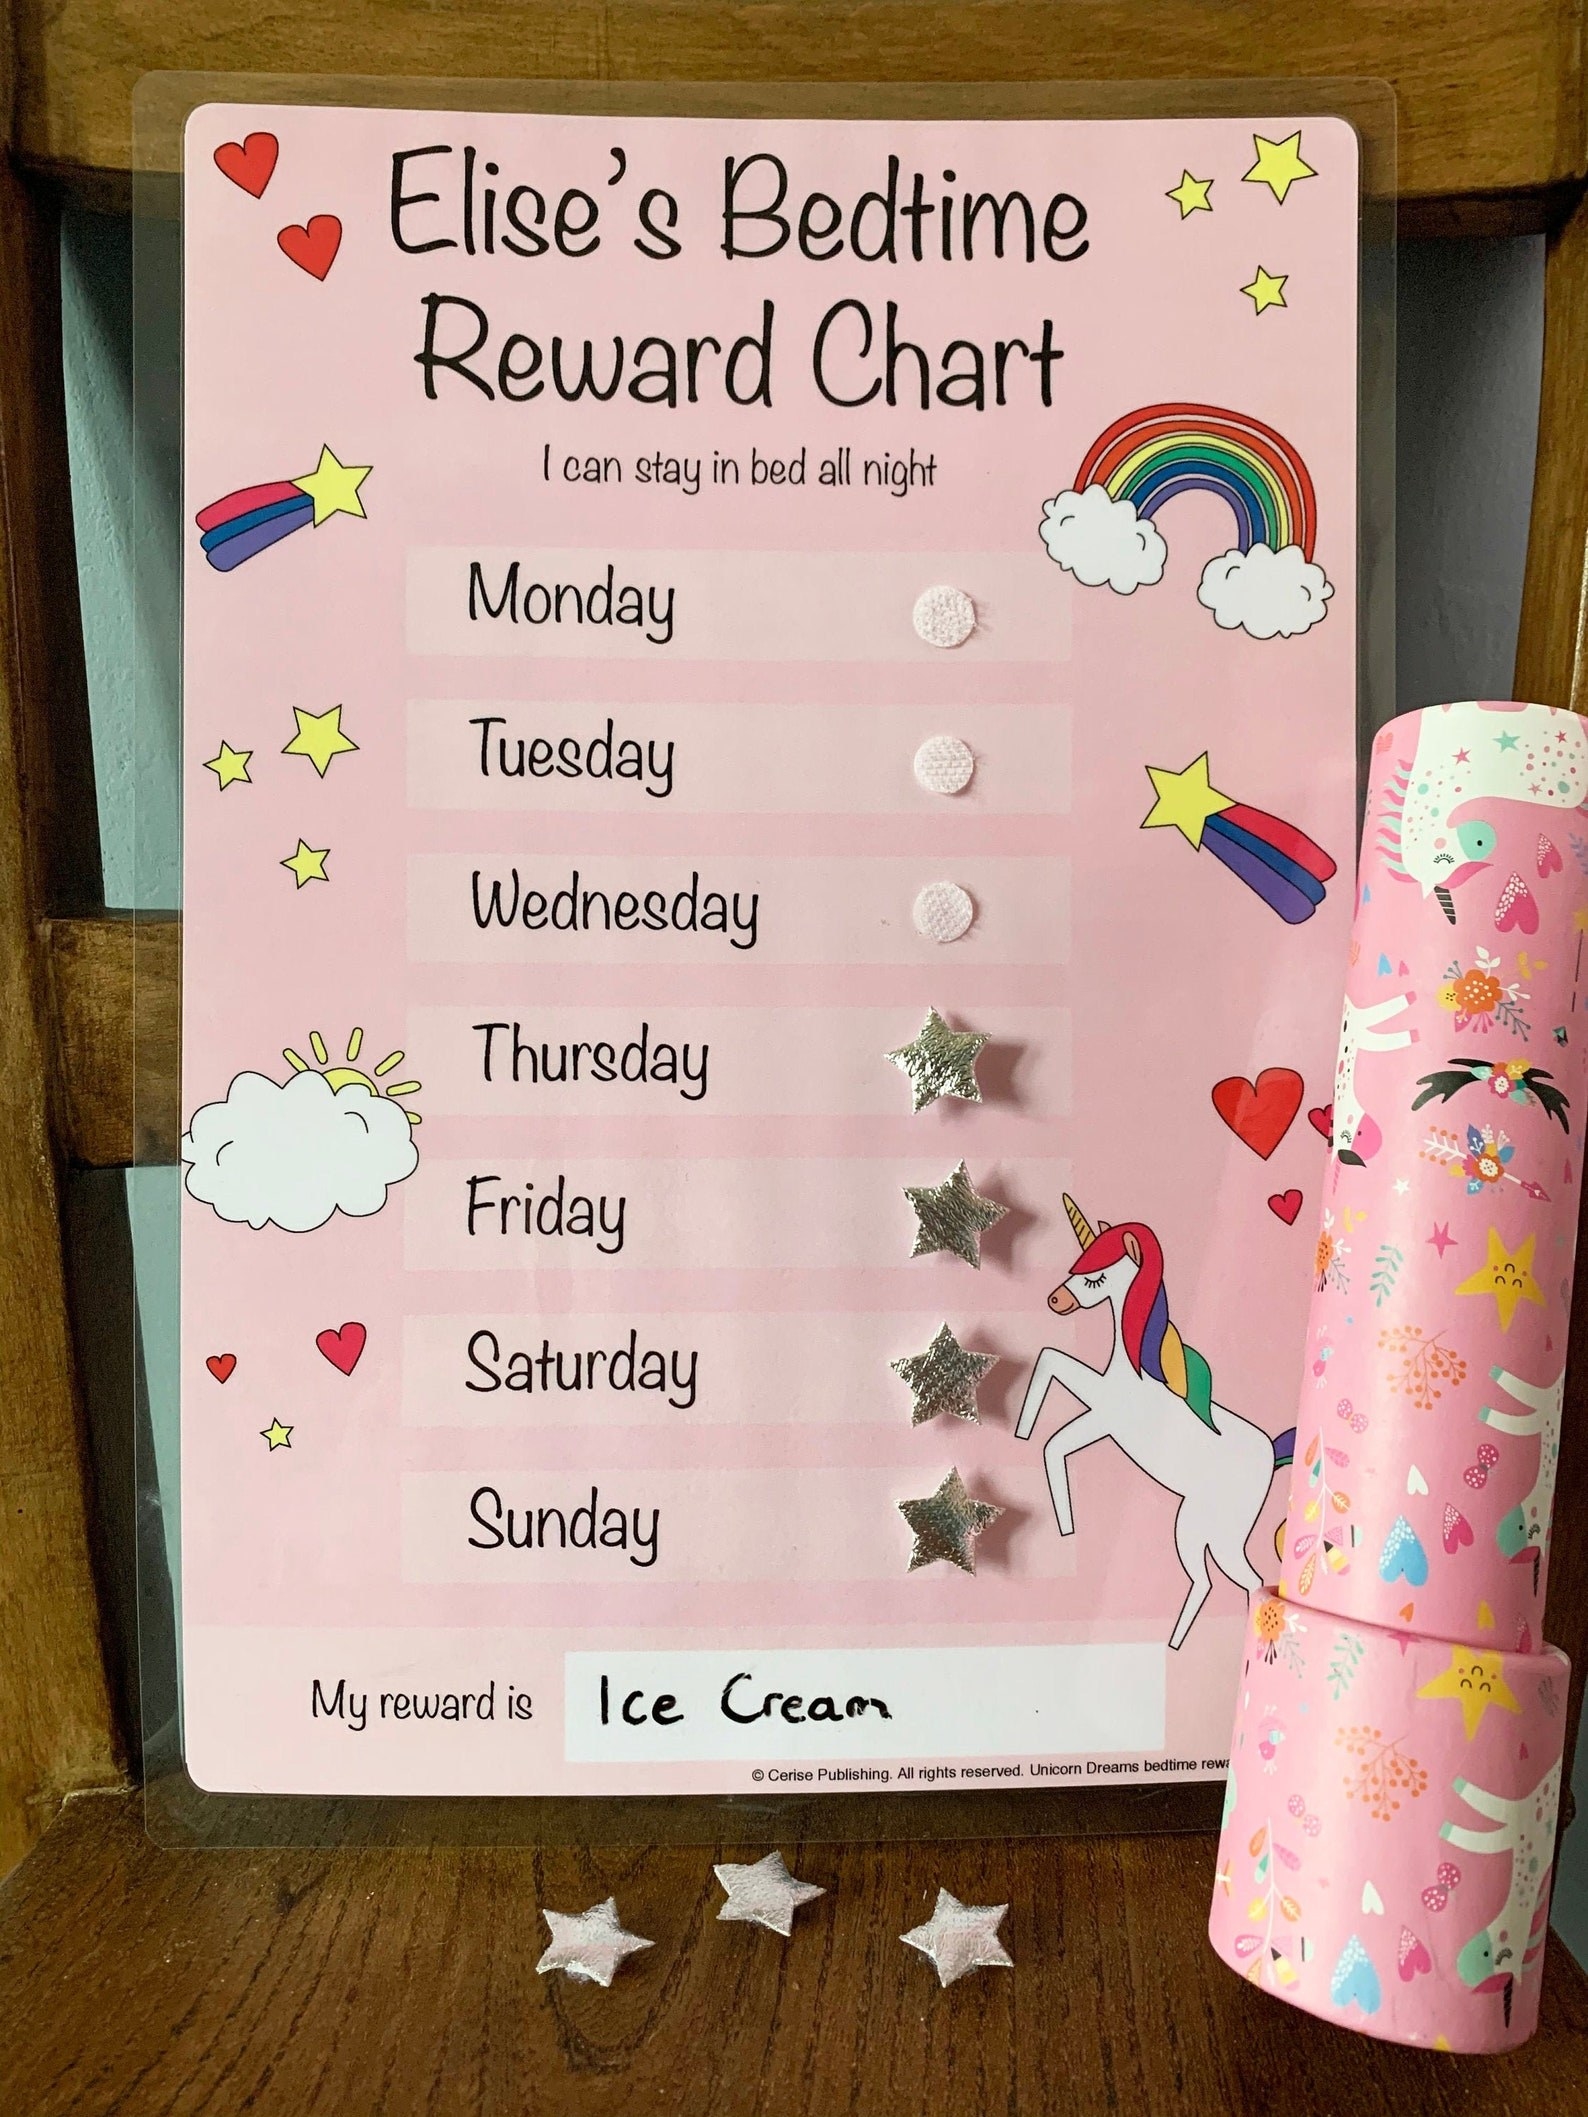 A pink chart with rainbows, unicorns and hearts and silver stars with a blank space to enter a reward at the bottom.